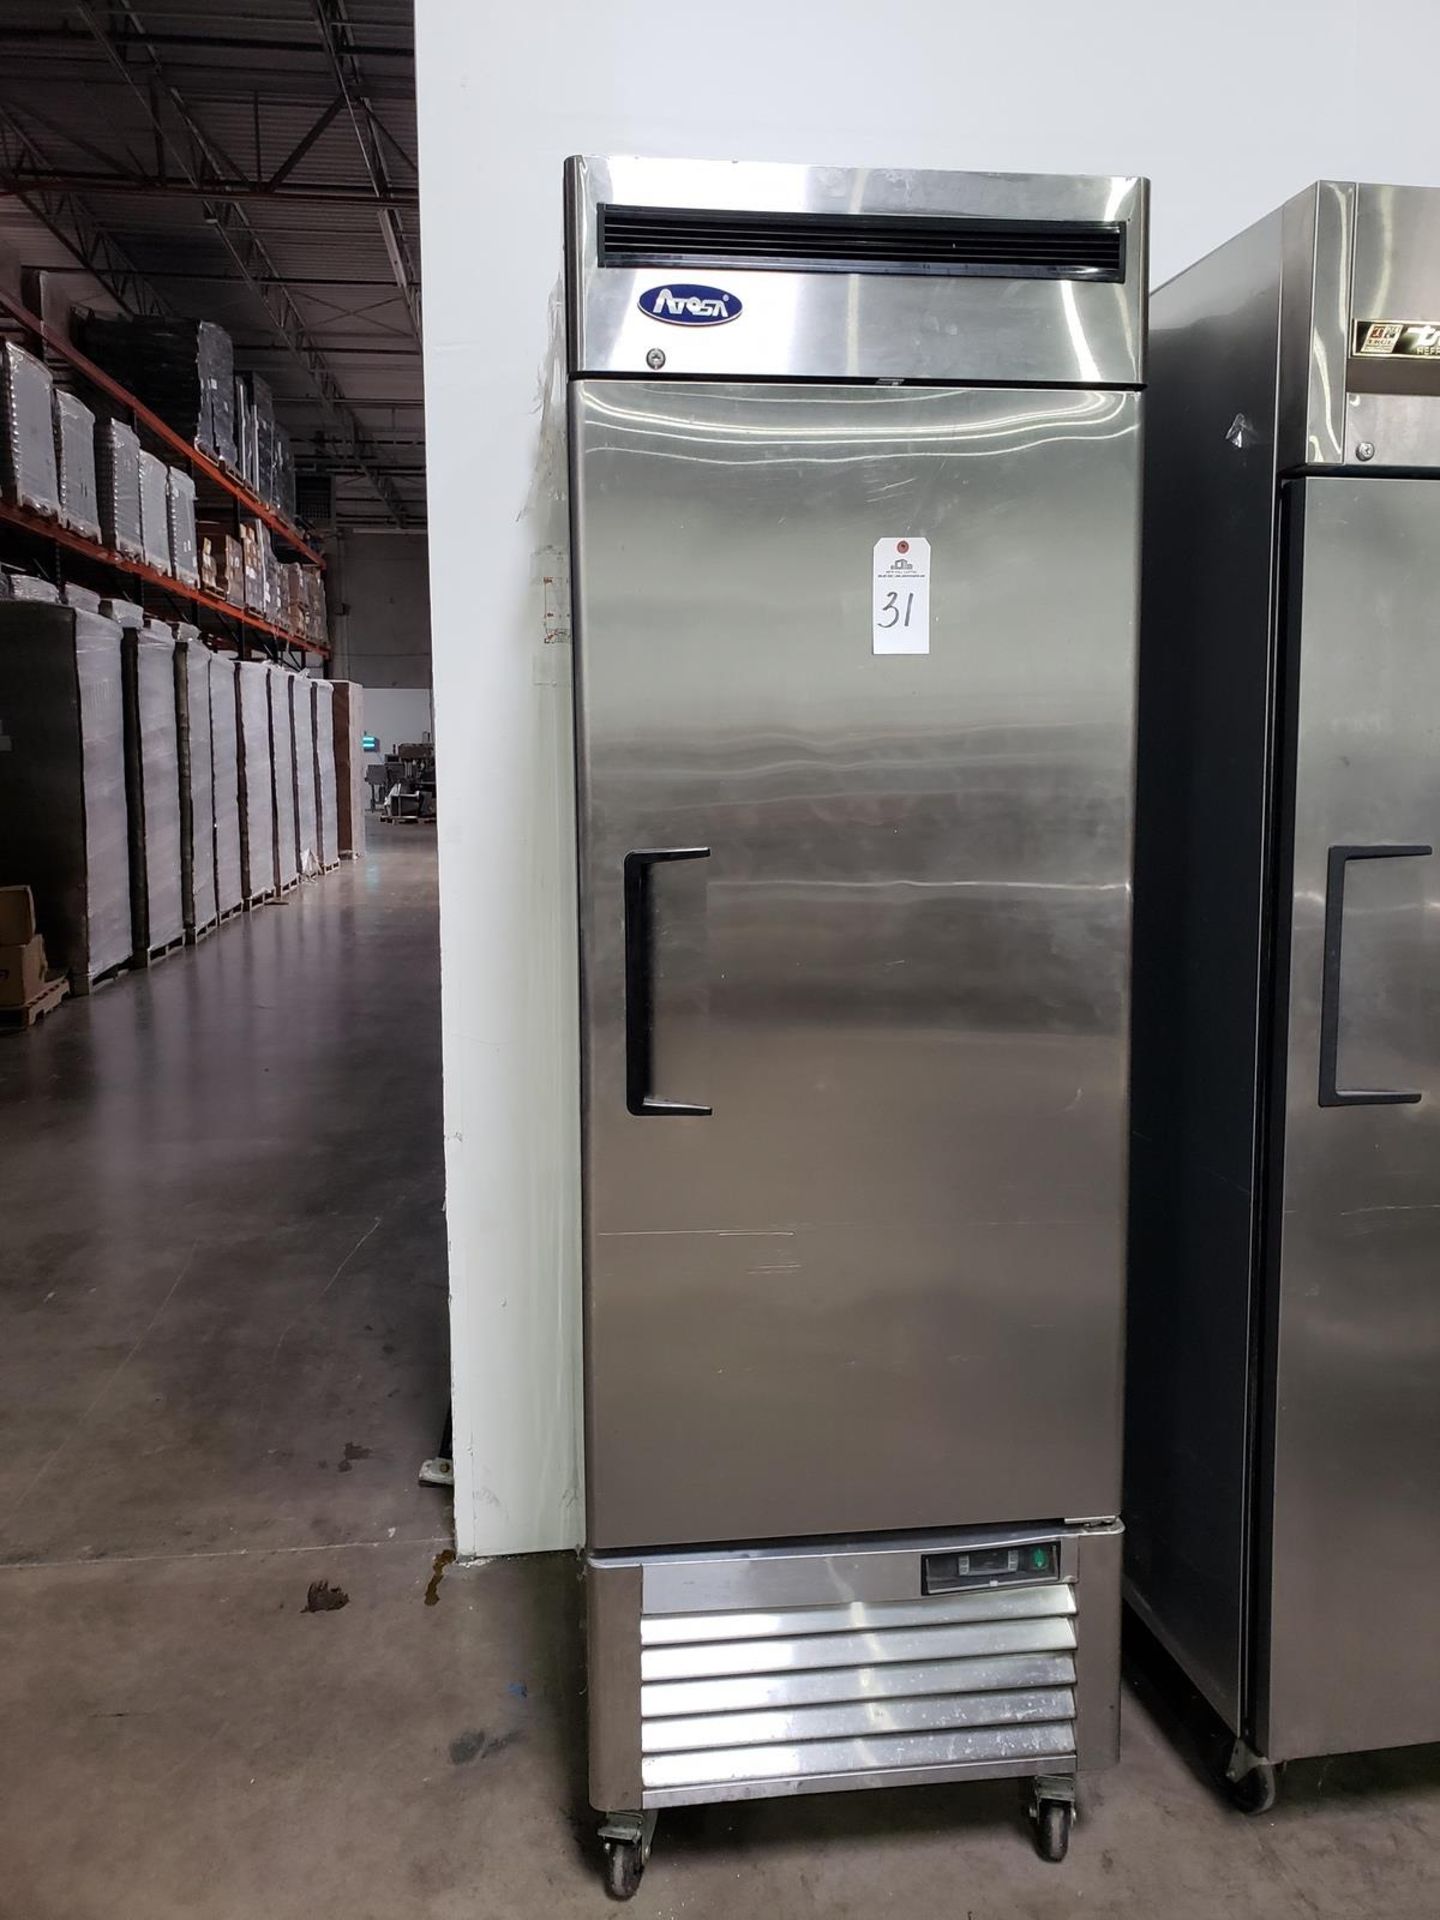 Atosa Stainless Steel Vertical Freezer, M# MBF8501C3R, S/N MBF8501GRAUS100318062600 | Rig Fee: $75